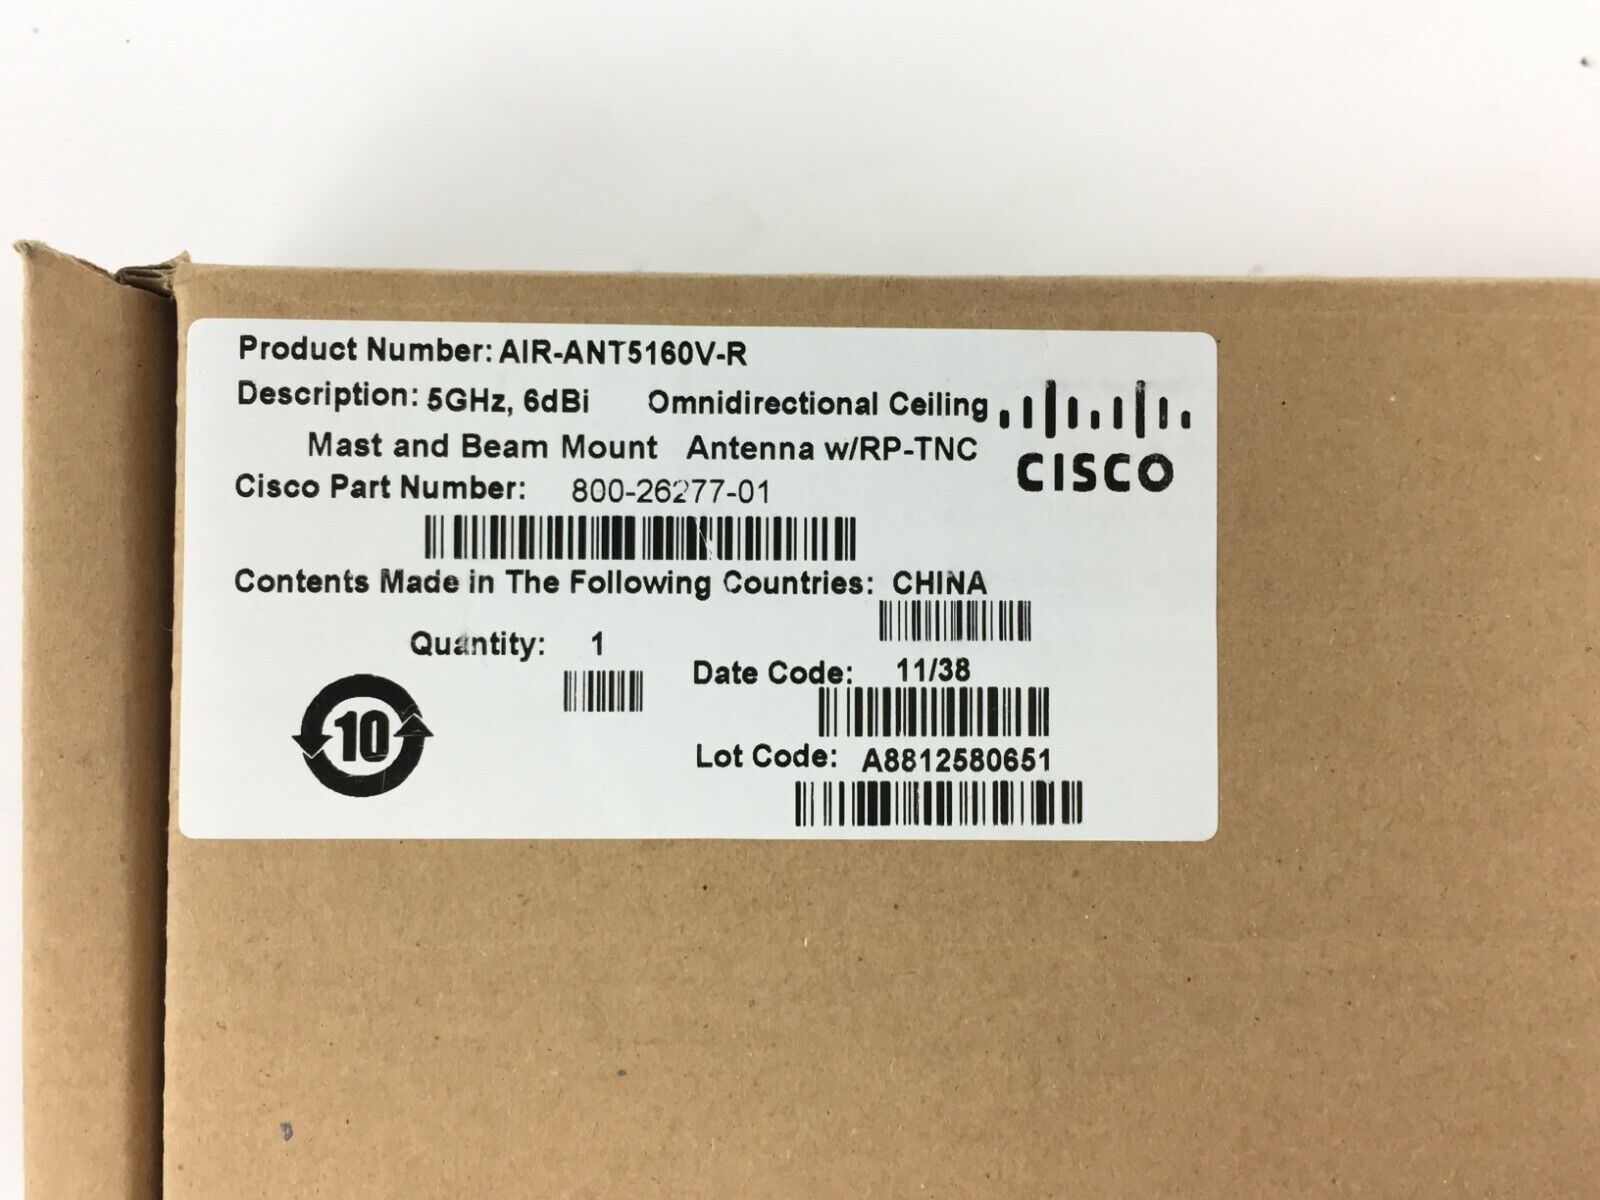 Cisco 800-26277-01 AIR-ANT5160V-R Mast and Beam Mount 5GHz, 6dBi Omnidirectional